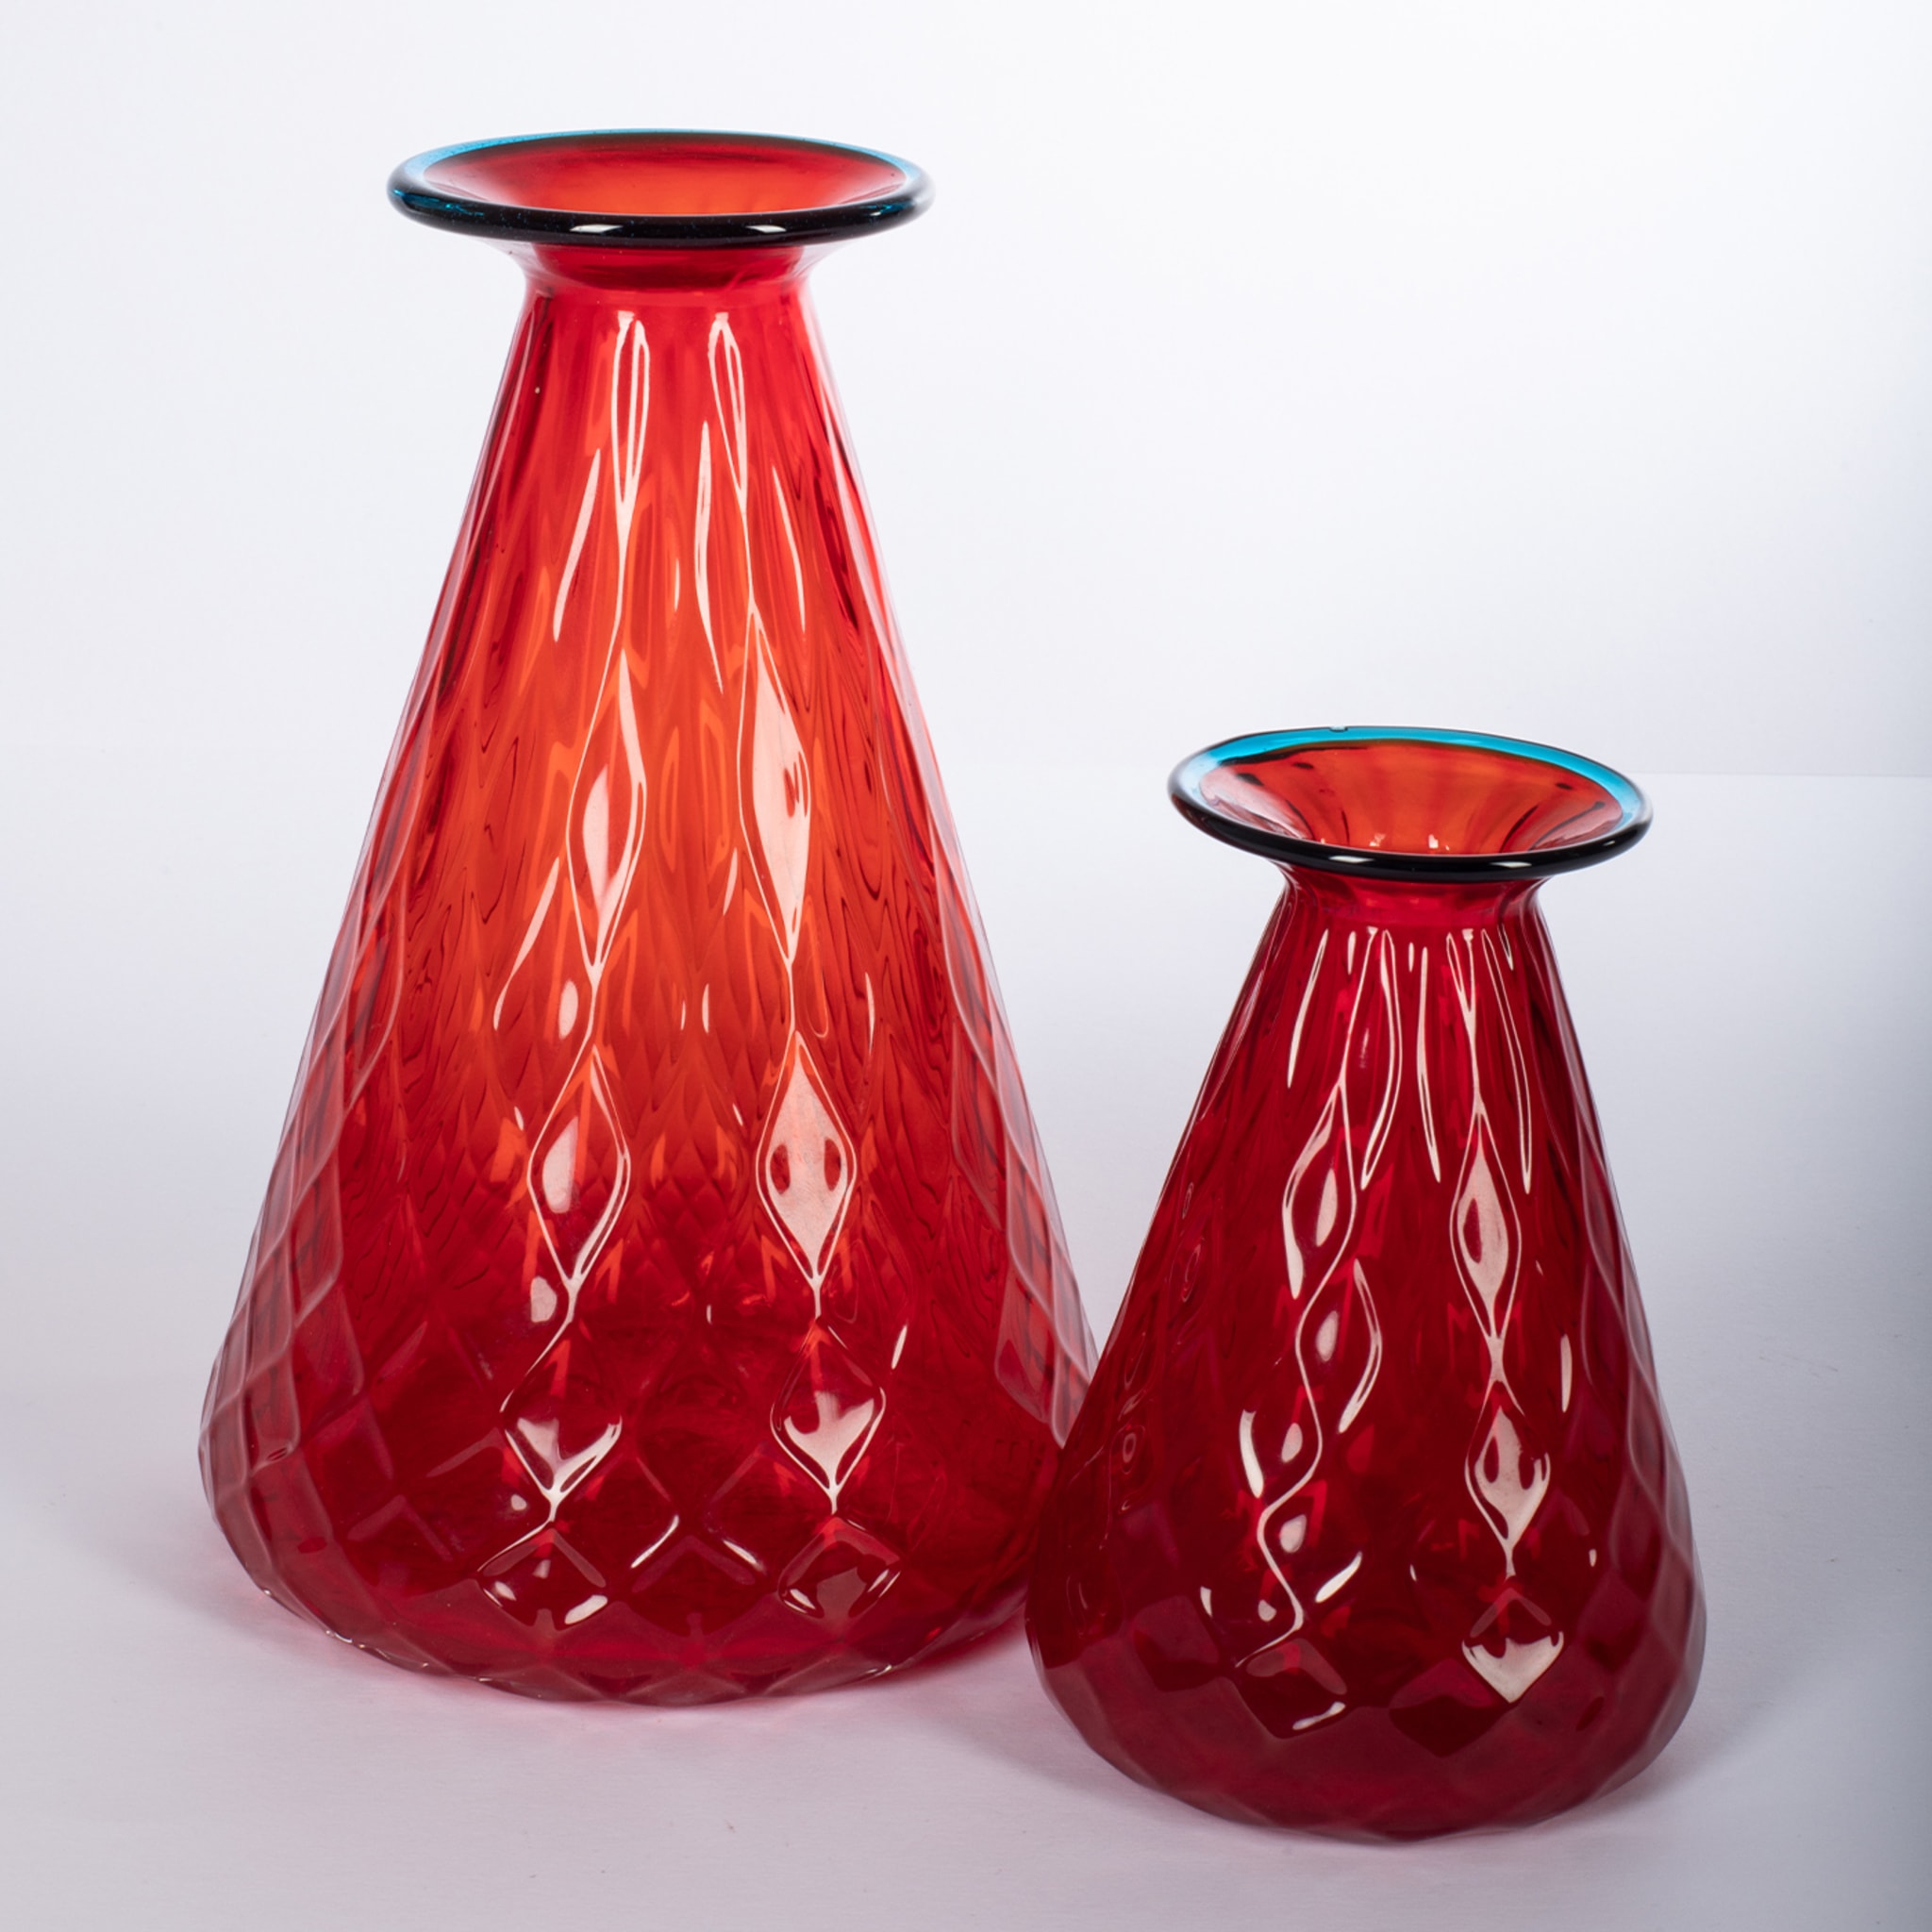 Balloton Set of 2 Conical Red Vases - Alternative view 2